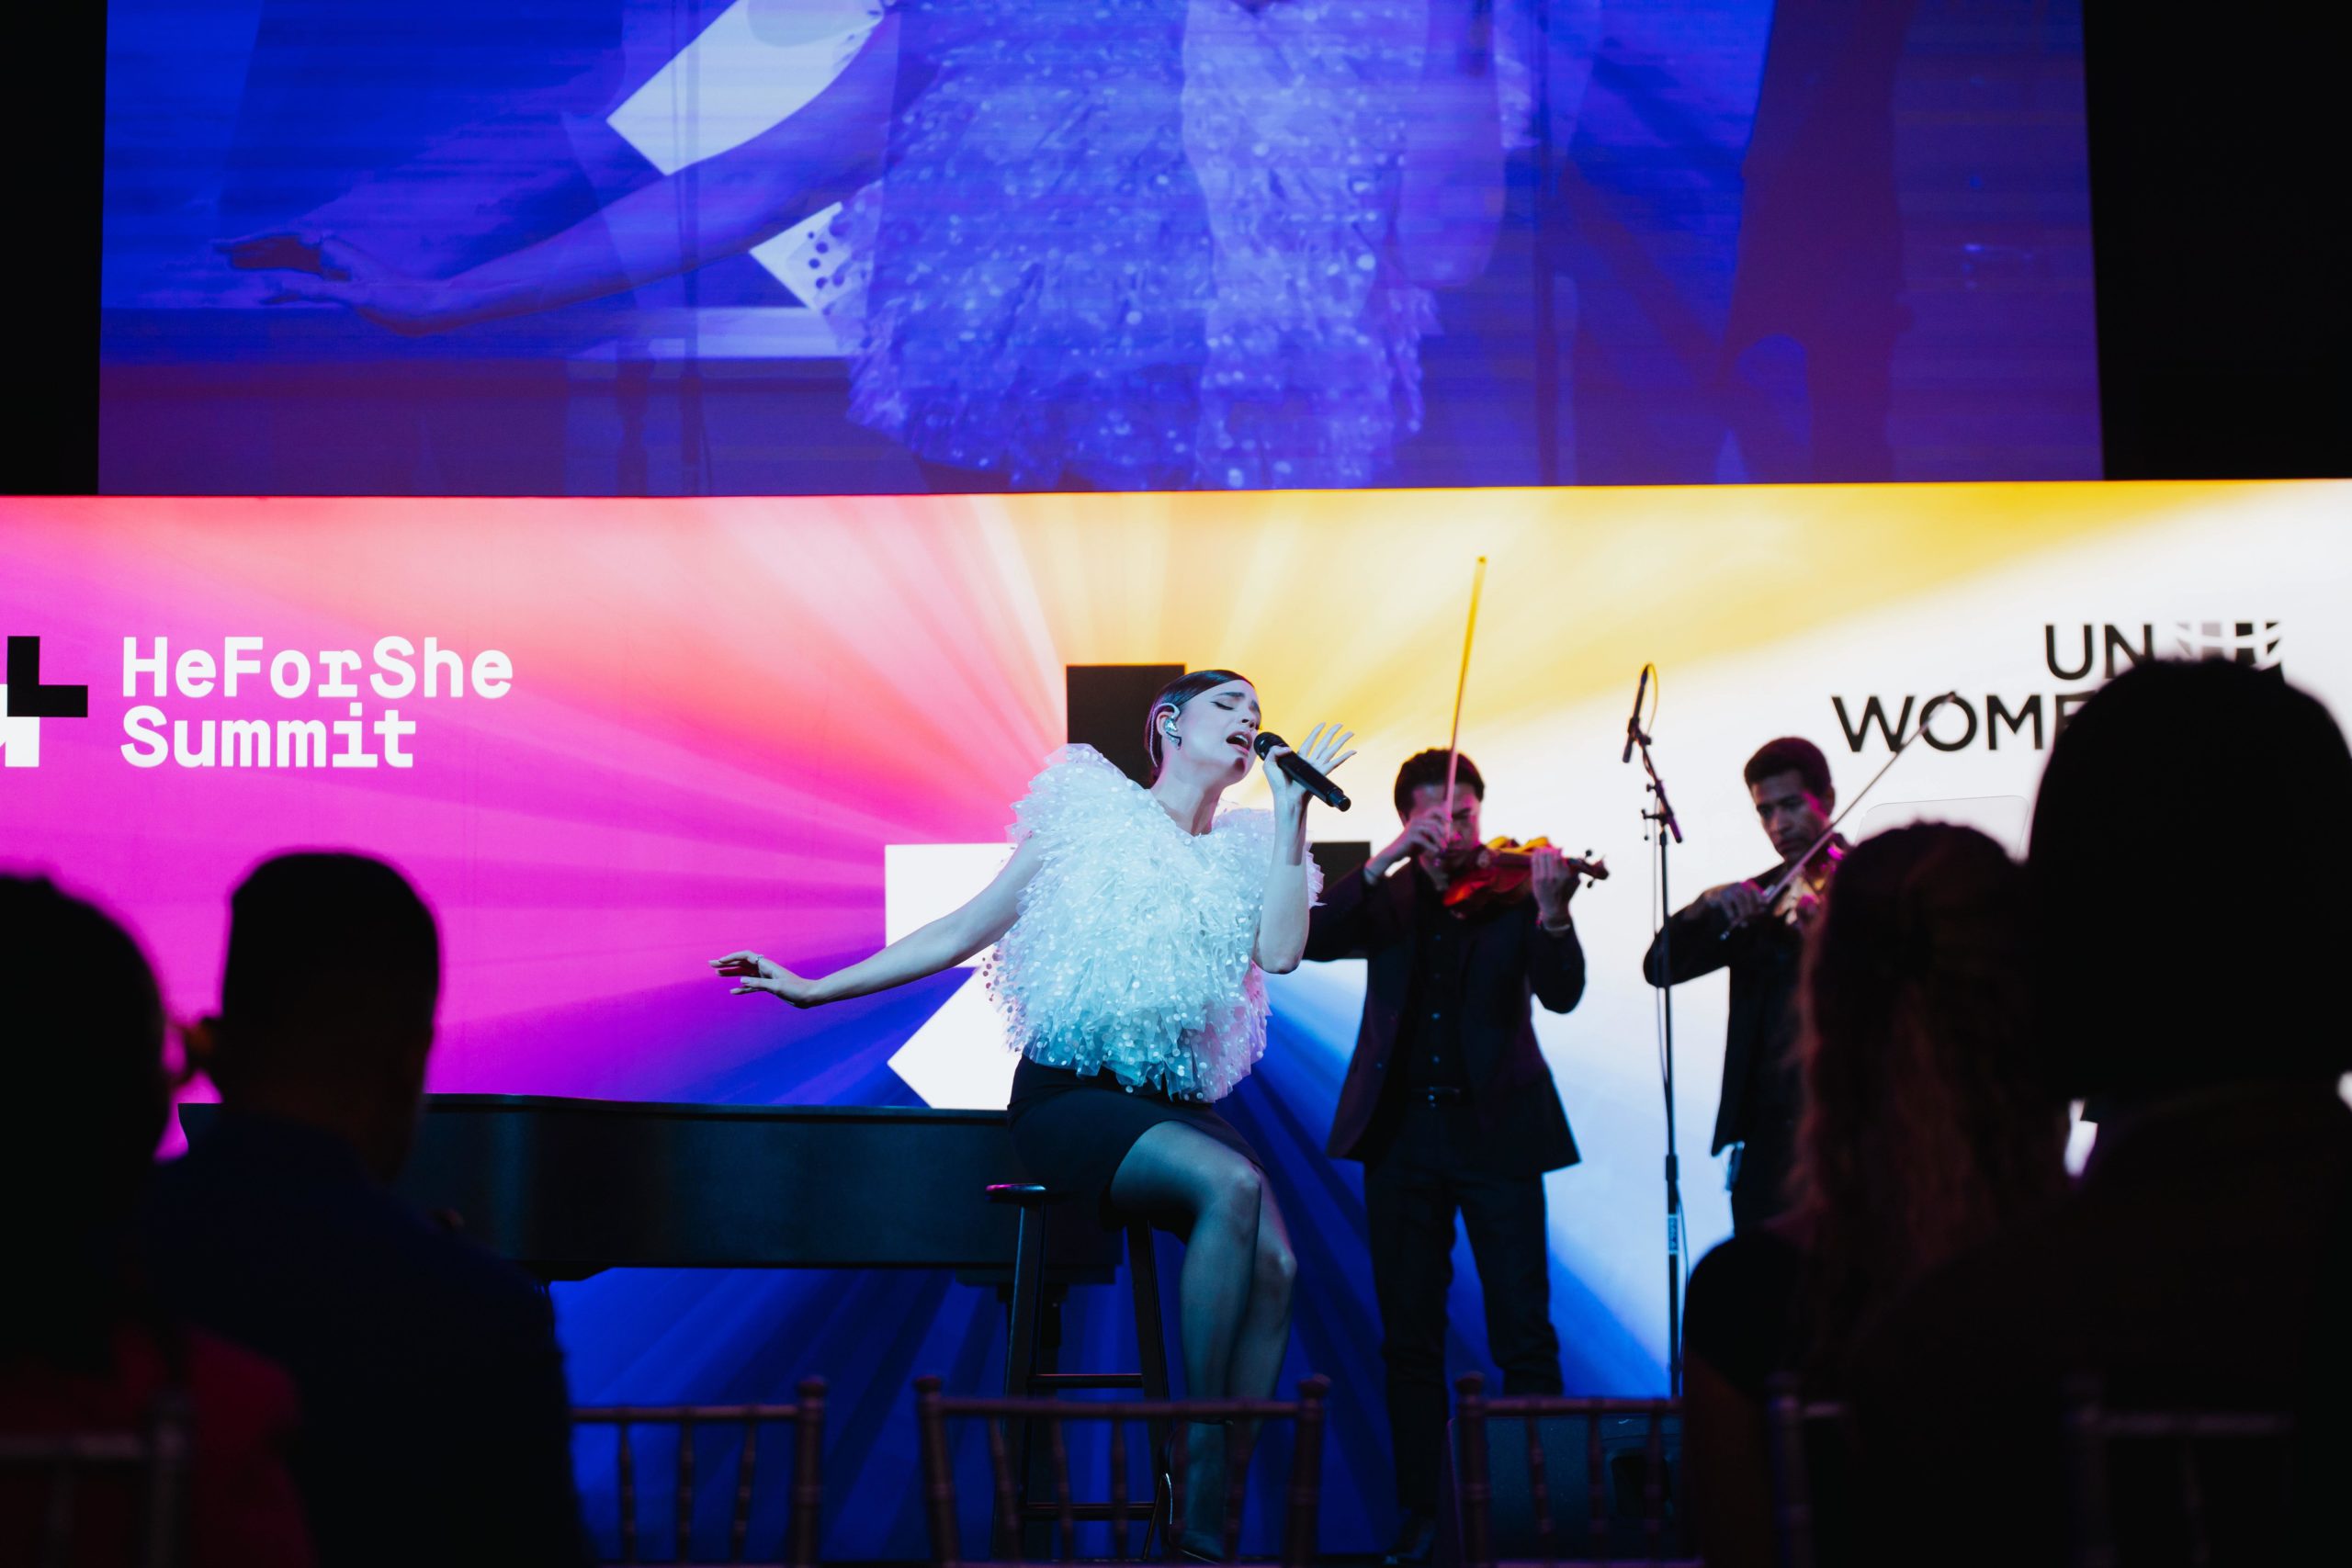  Sofia Carson performing at the HeForShe Summit. Image courtesy of Acacia Evans